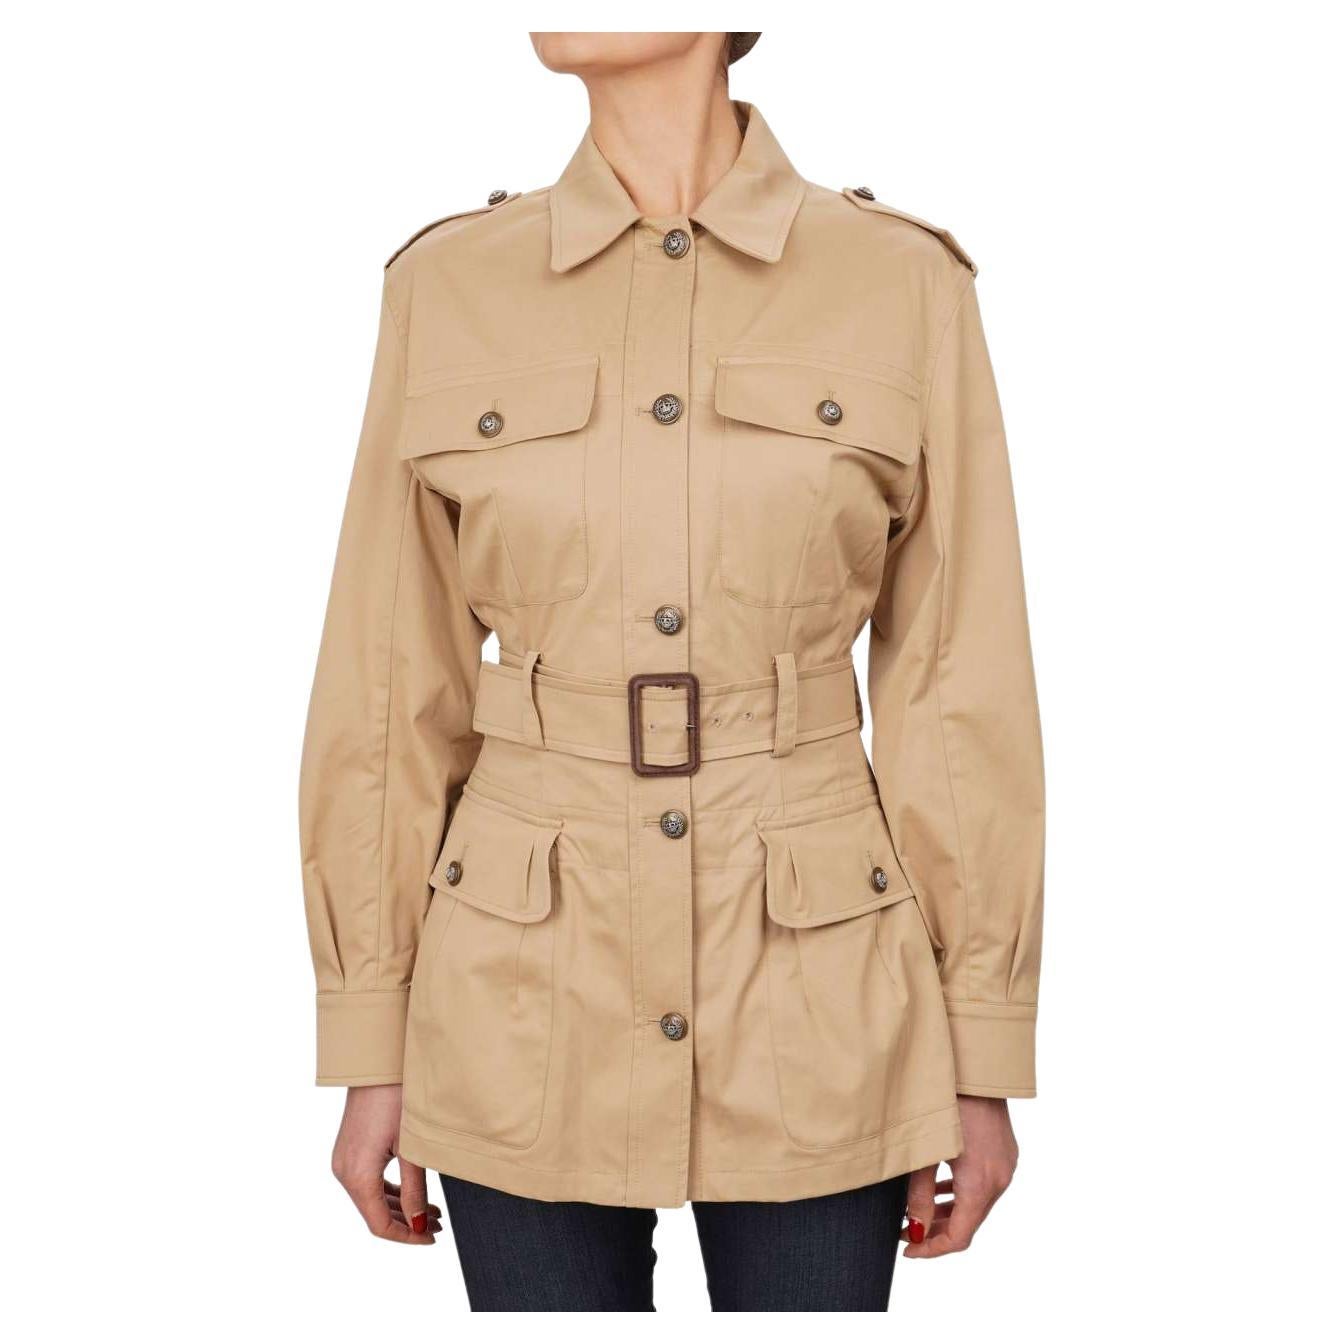 Dolce & Gabbana Metal Crown Buttons Trench Coat Safari Jacket Beige IT 38 For Sale